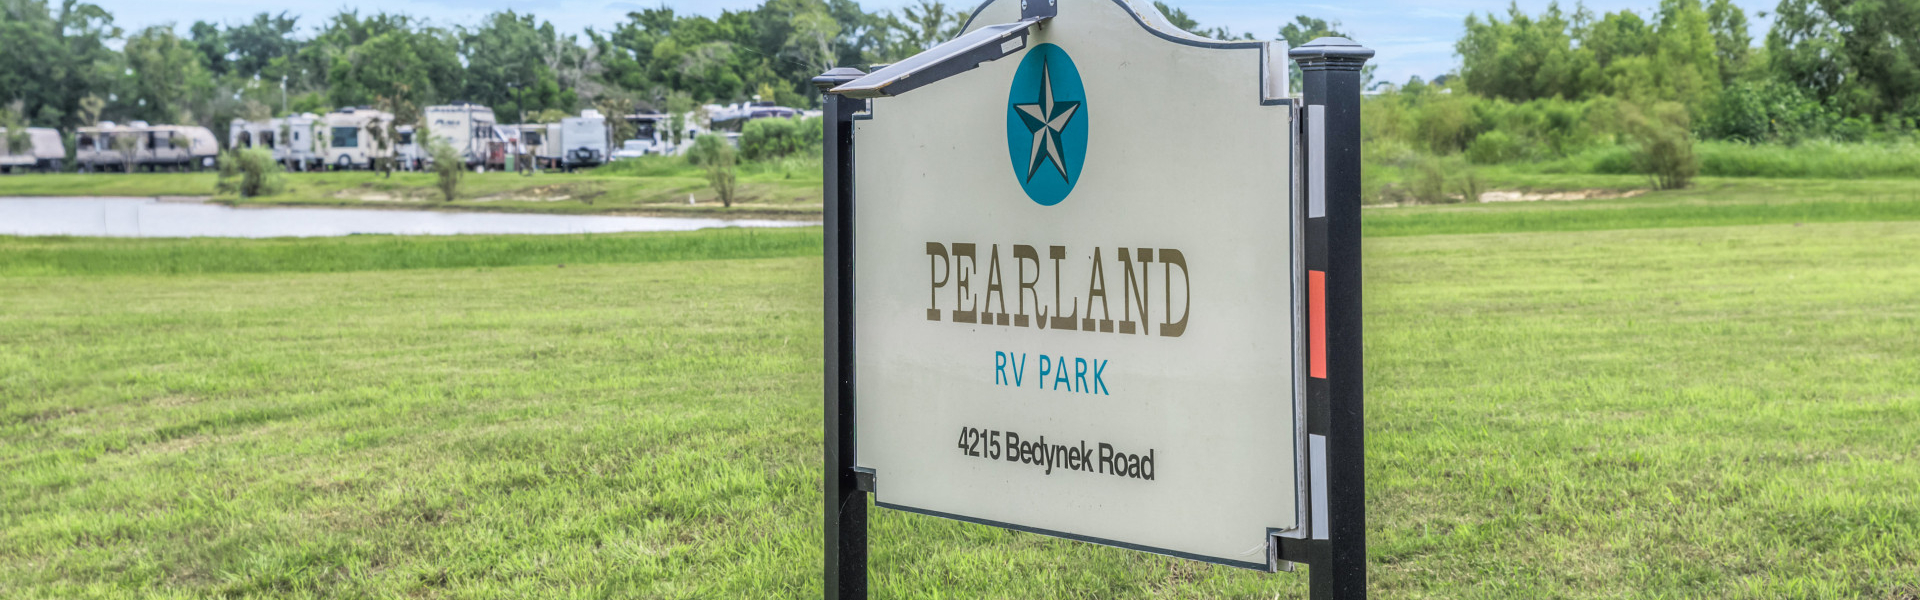 Pearland-web-5